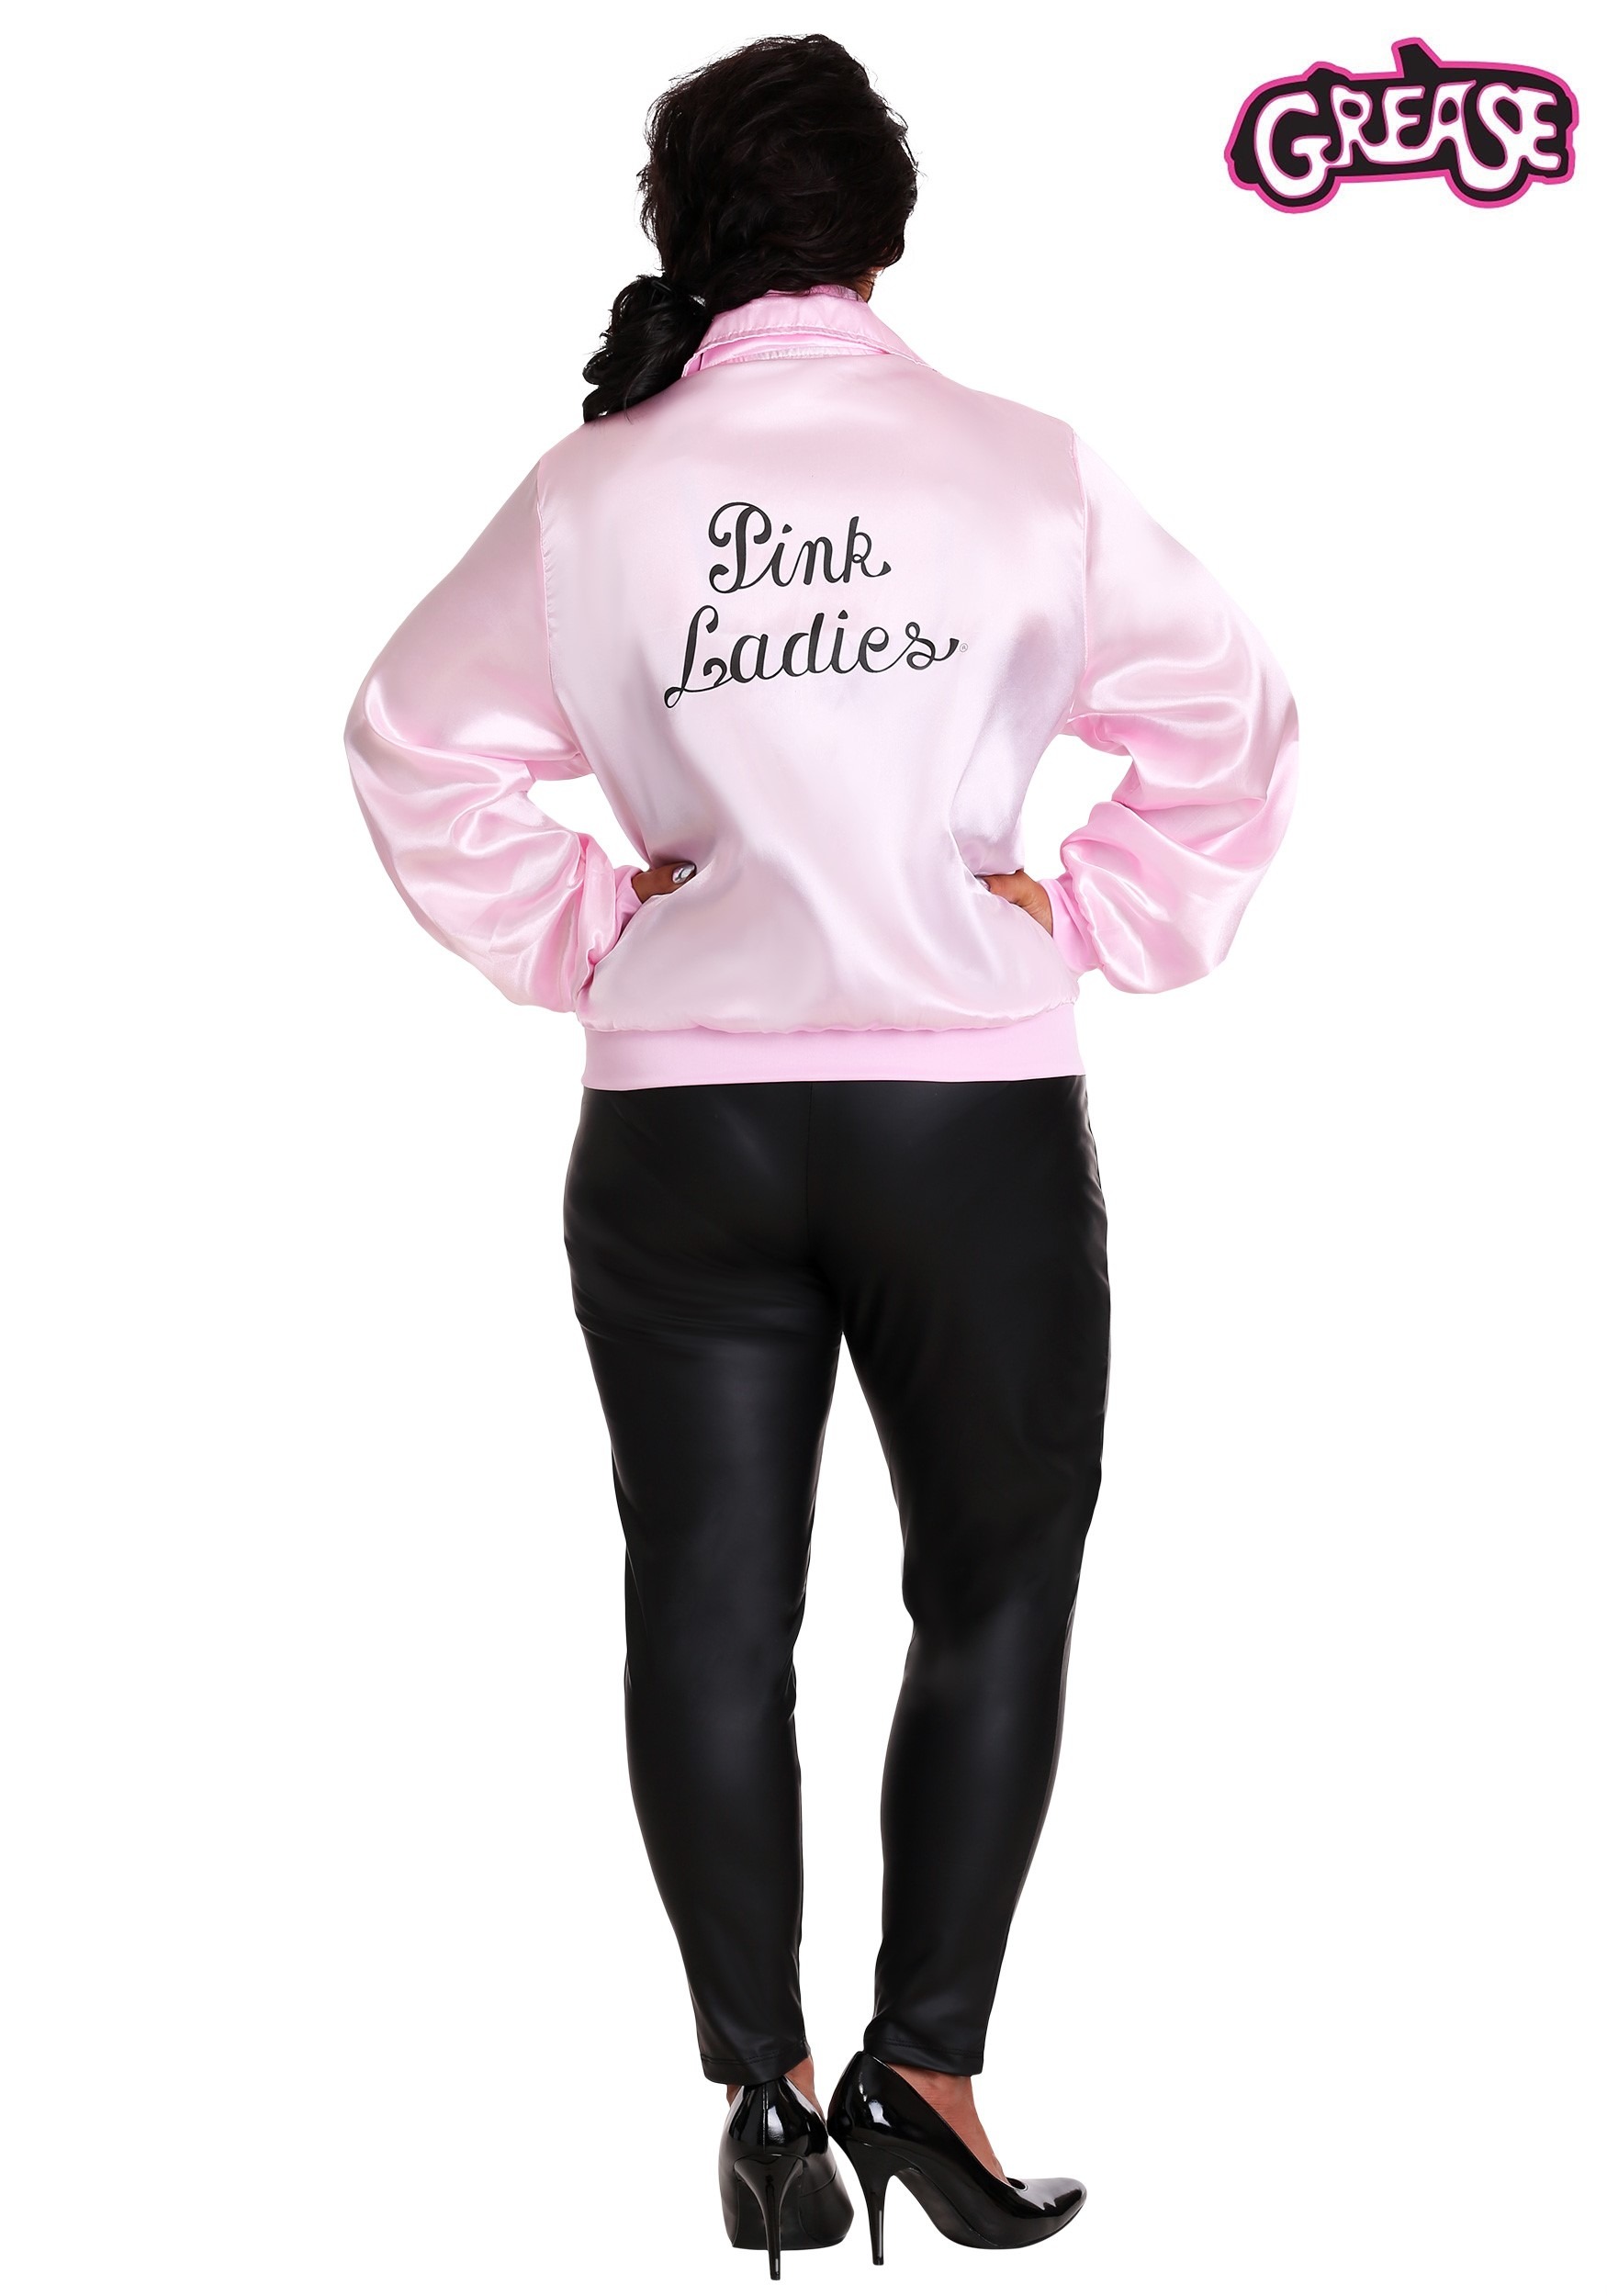 Plus Size Grease Pink Ladies Costume 